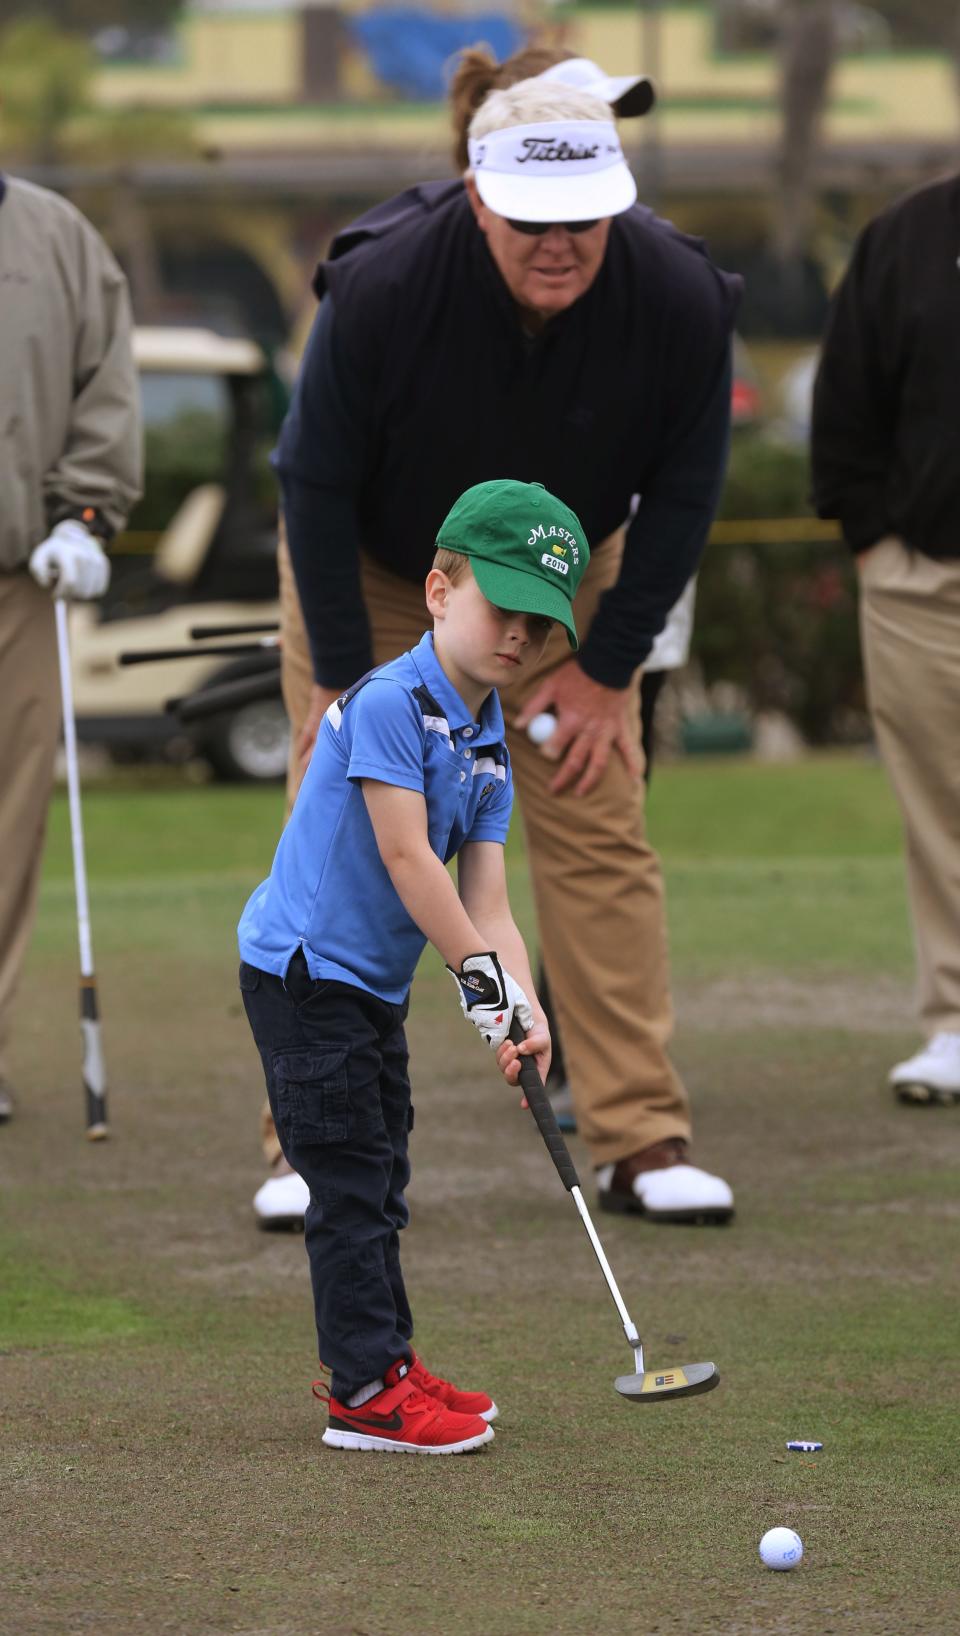 Riley Darby putts under the watch full eye of Andy Bean during the Barkley, Bean, Bryant and Friends Celebrity Skins Game at The First Tee of Lakeland in 2015.